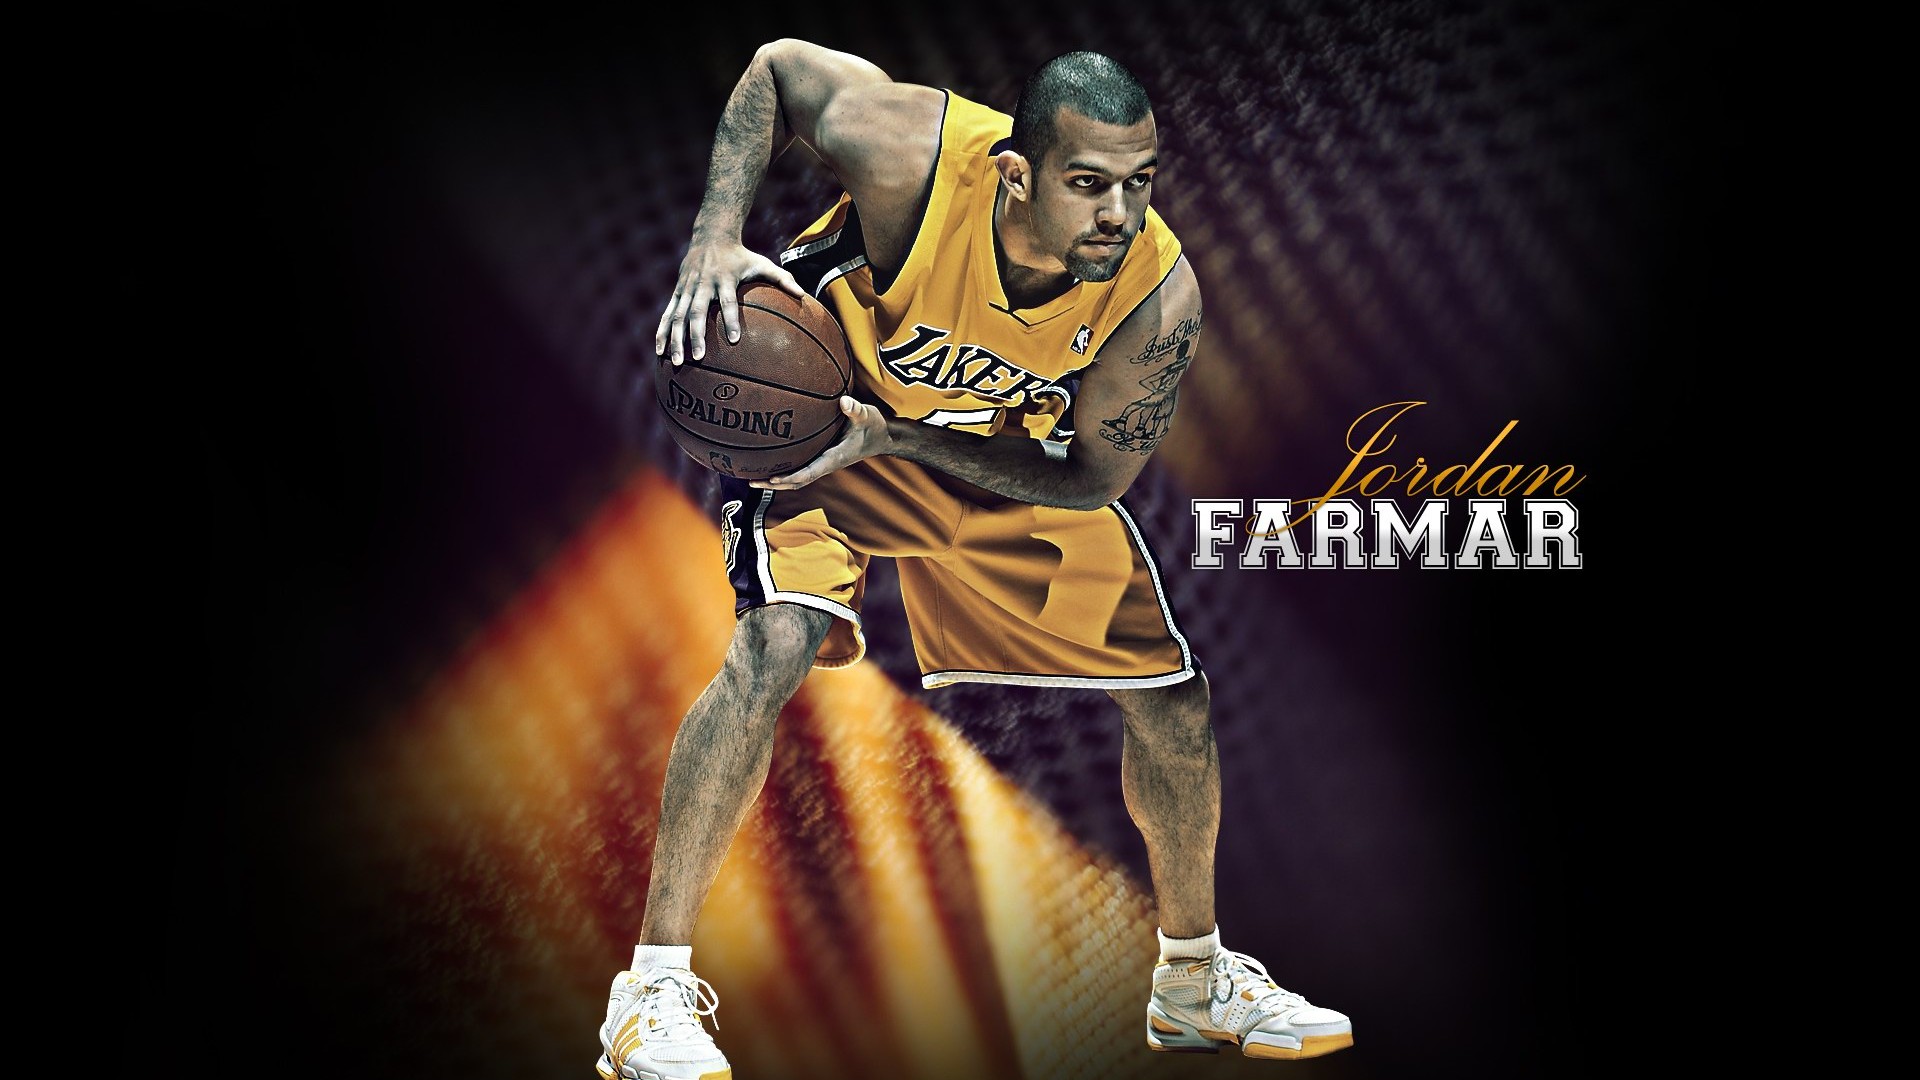 Los Angeles Lakers Wallpaper Oficial #10 - 1920x1080